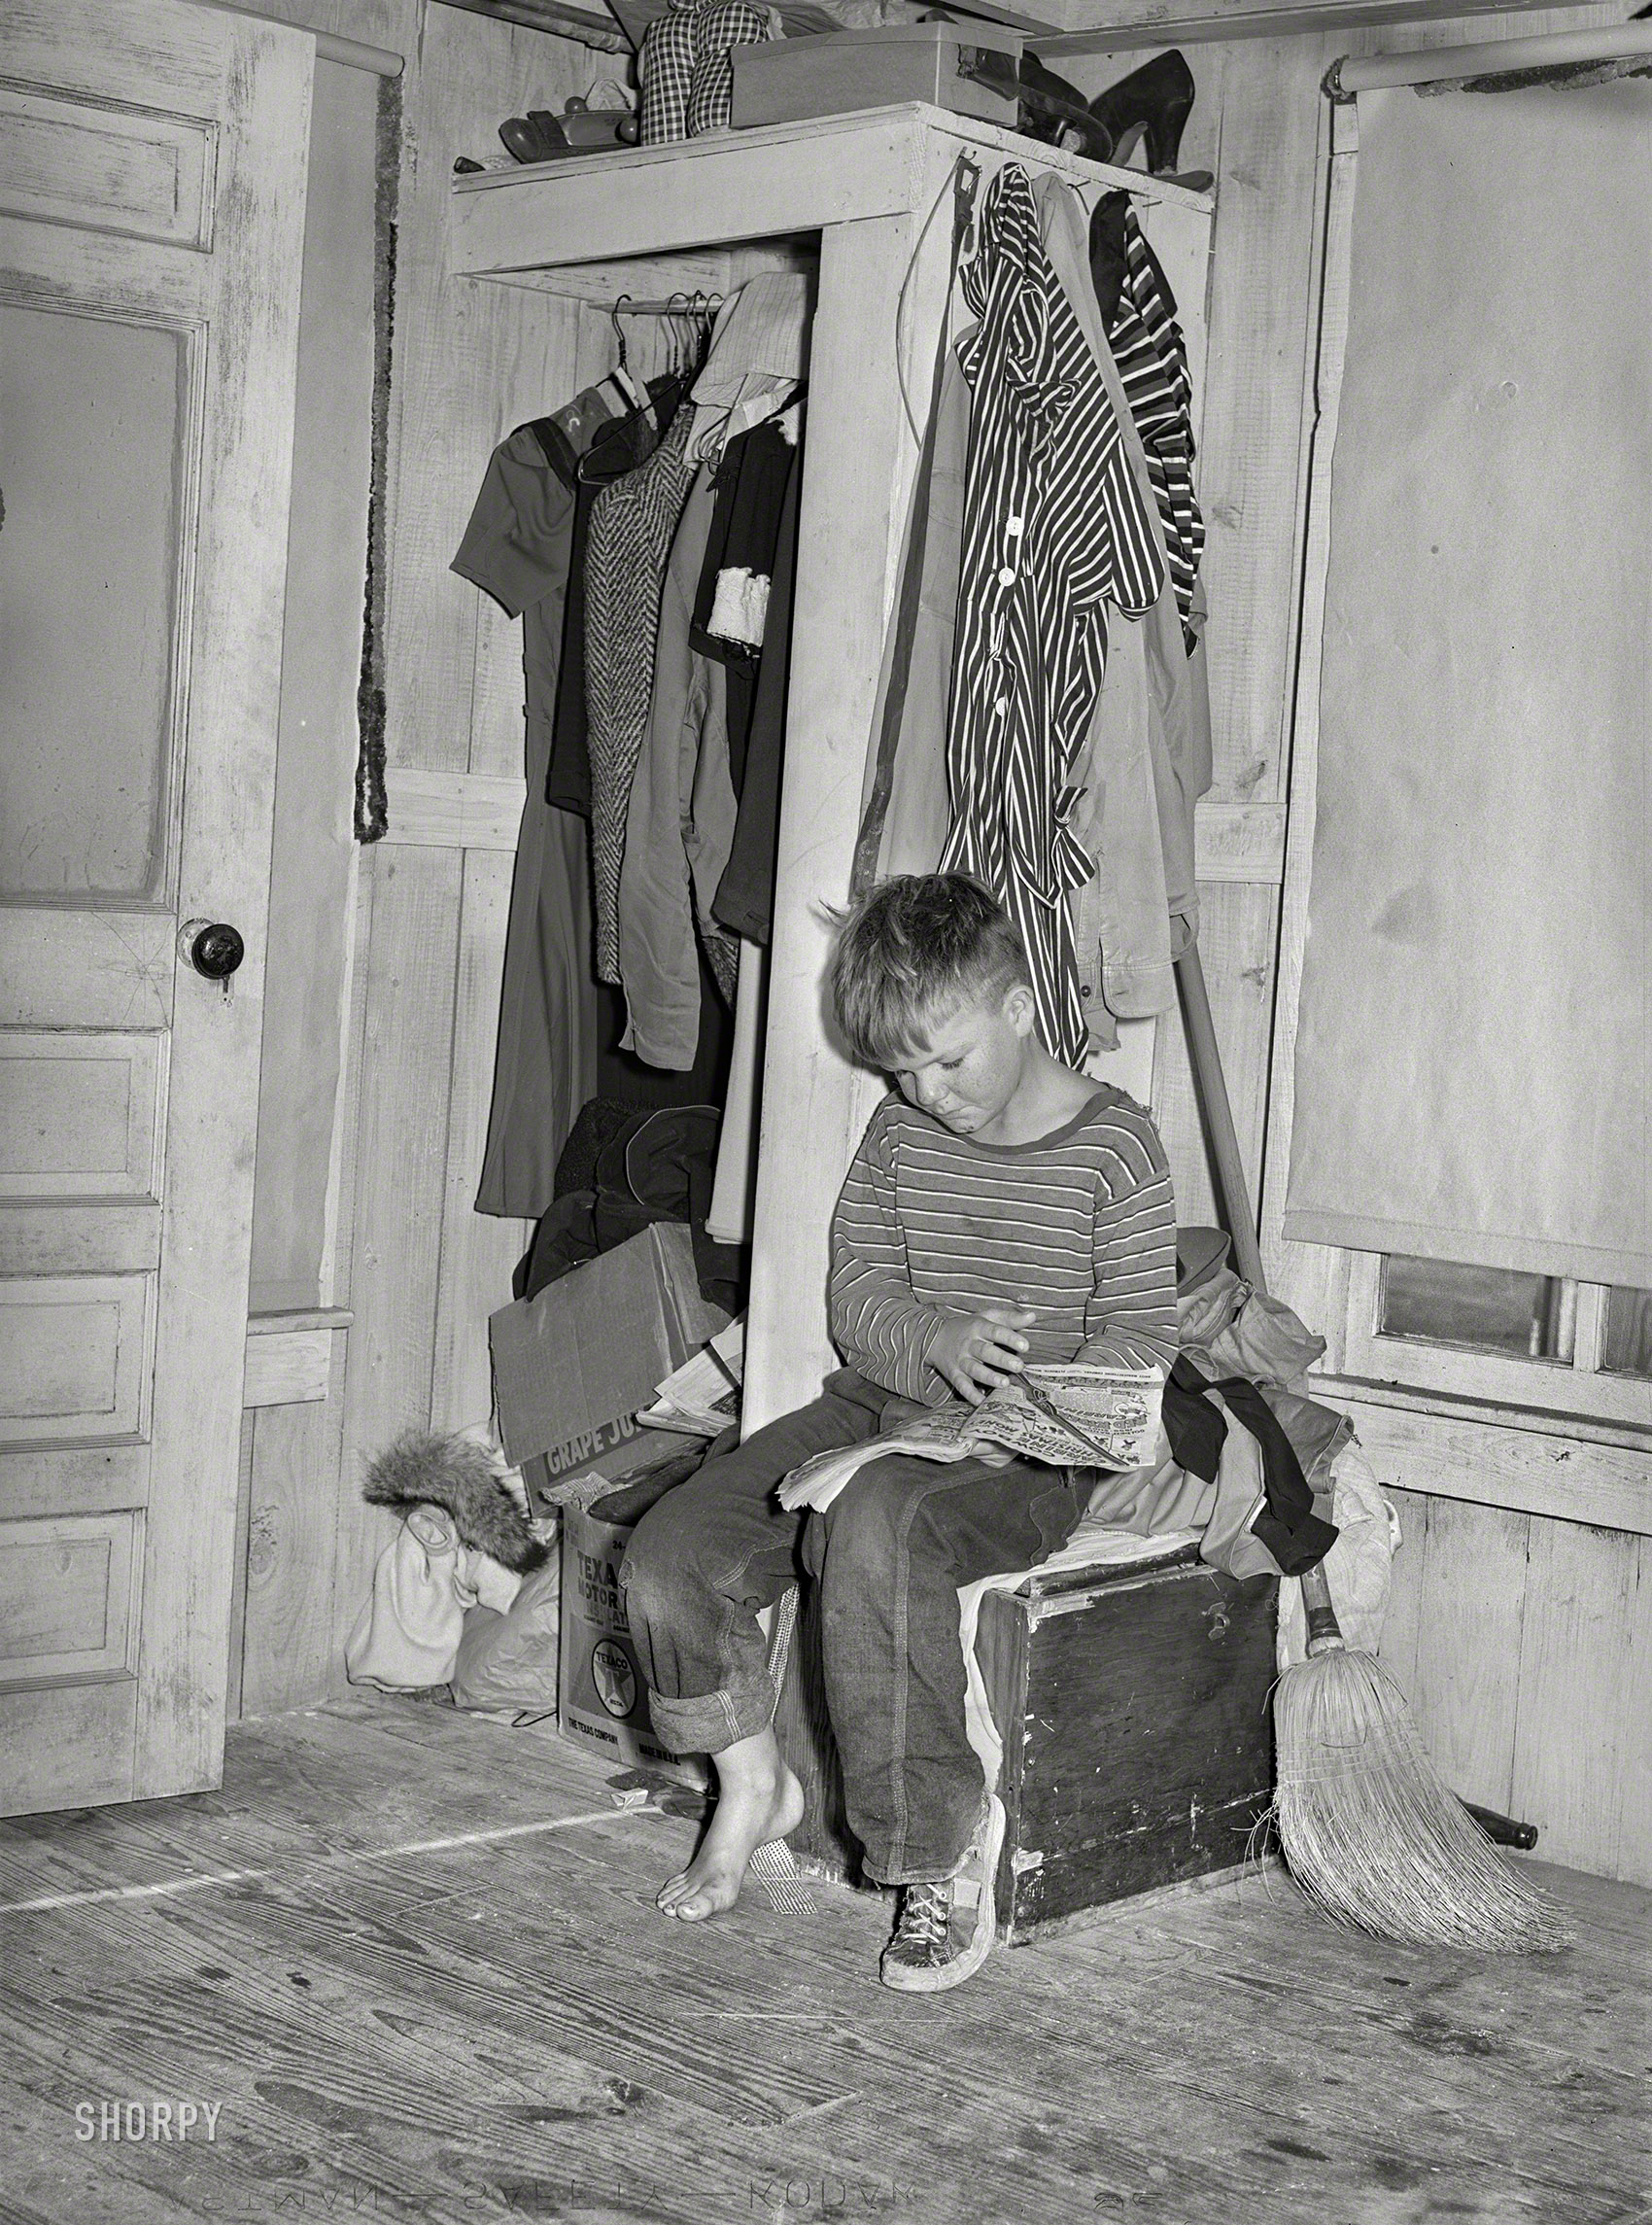 December 1940. Corpus Christi, Texas. "Small boy, son of carpenter from Hobbs, New Mexico, reading funny papers in corner of room in tourist court. Lack of adequate closet space is evident." Medium format acetate negative by Russell Lee for the Farm Security Administration. View full size.